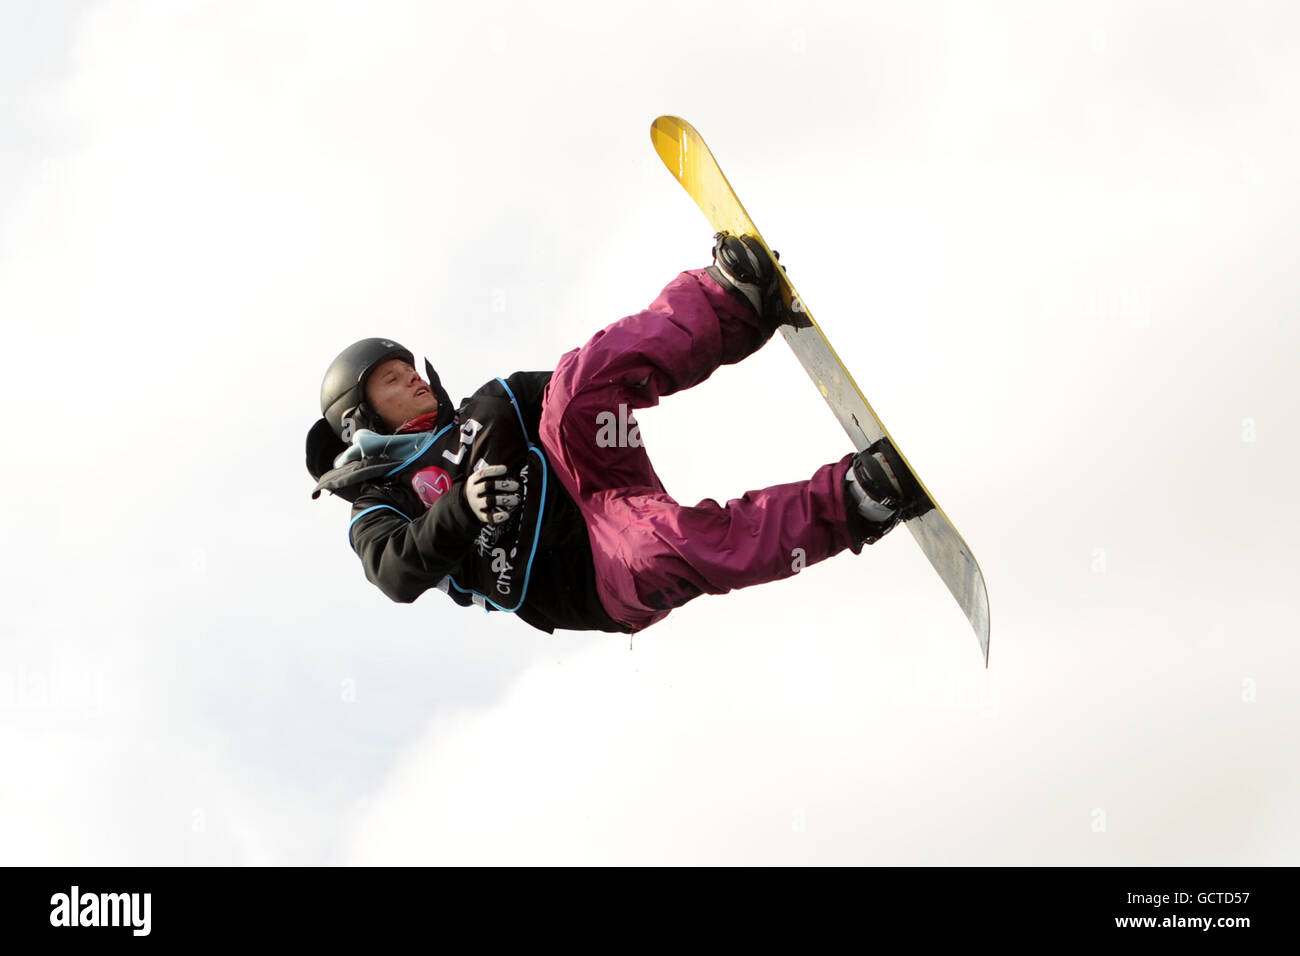 Dmitry Repnikov of Russia during the LG Snowboard FIS World Cup in London Stock Photo